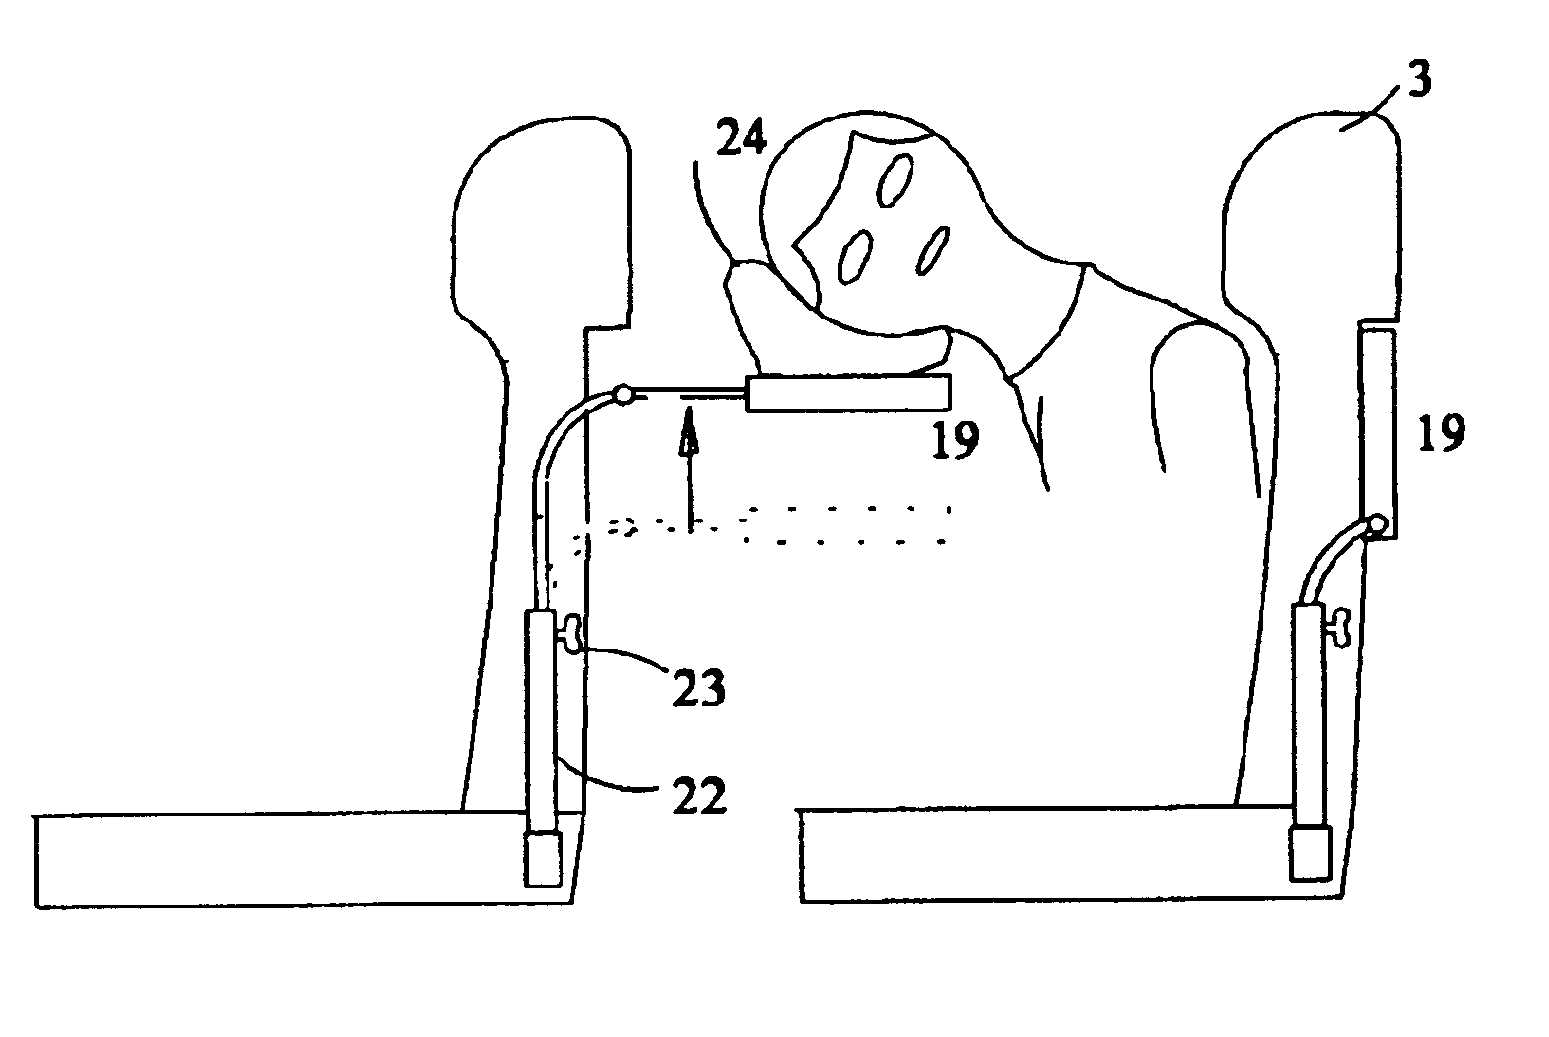 Facilitate sleeping of a person in sitting position by supporting the head and/or body